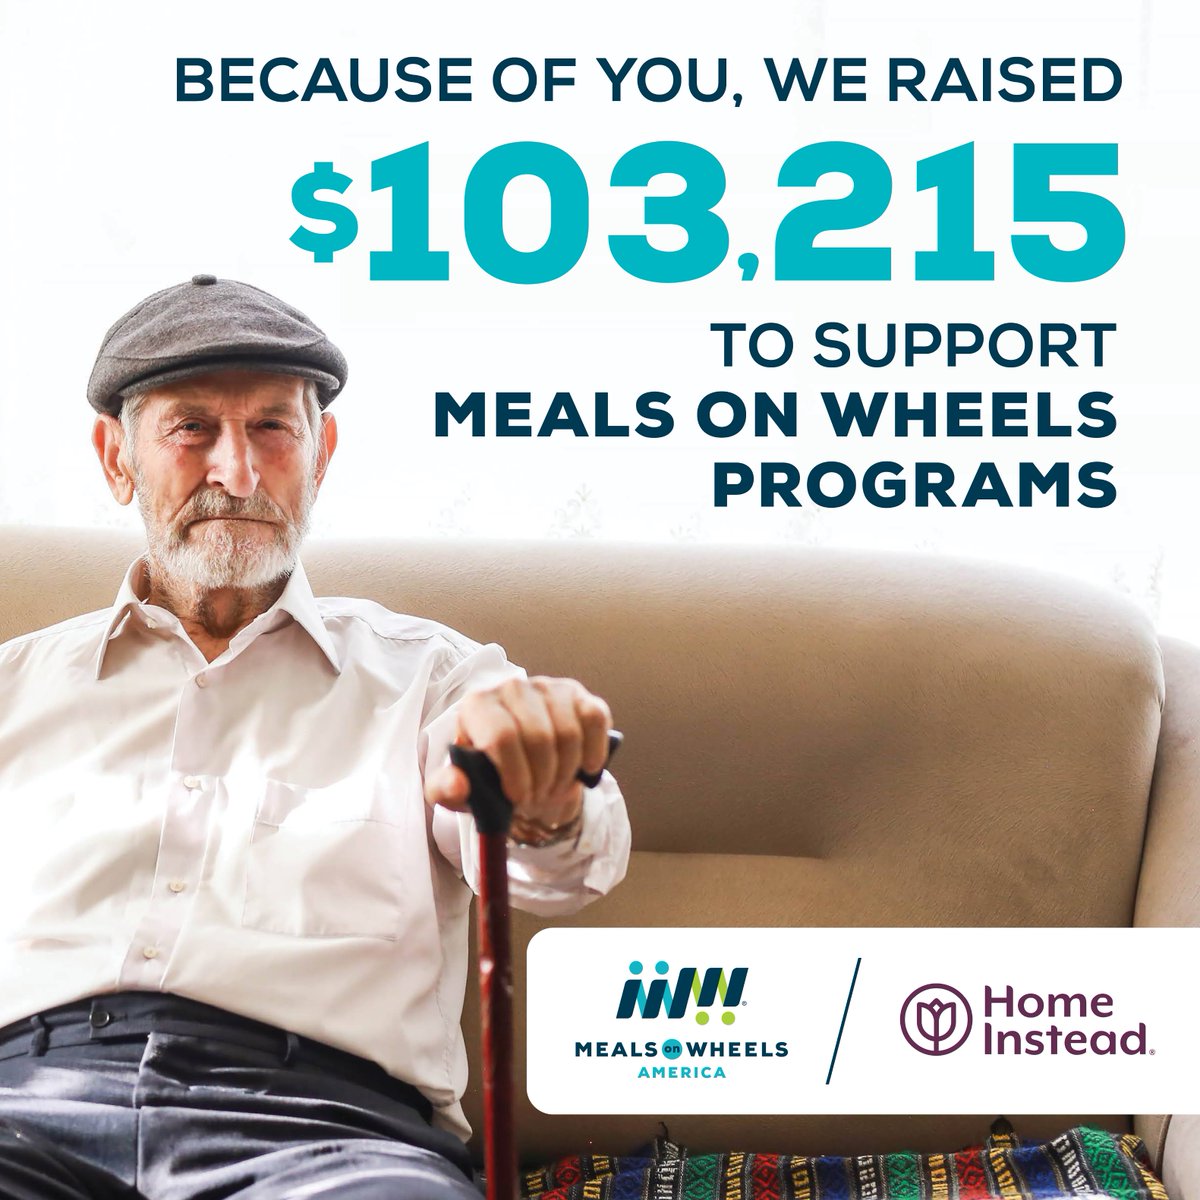 🎉 Thank you to all who donated to help us exceed our goal! Your generous support allows @_MealsOnWheels to serve more #olderadults in communities across the U.S. 🙌 💜 

#HomeInstead #MealsOnWheels #fundraising #PowerOfaKnock #seniornutrition #foodsecurity